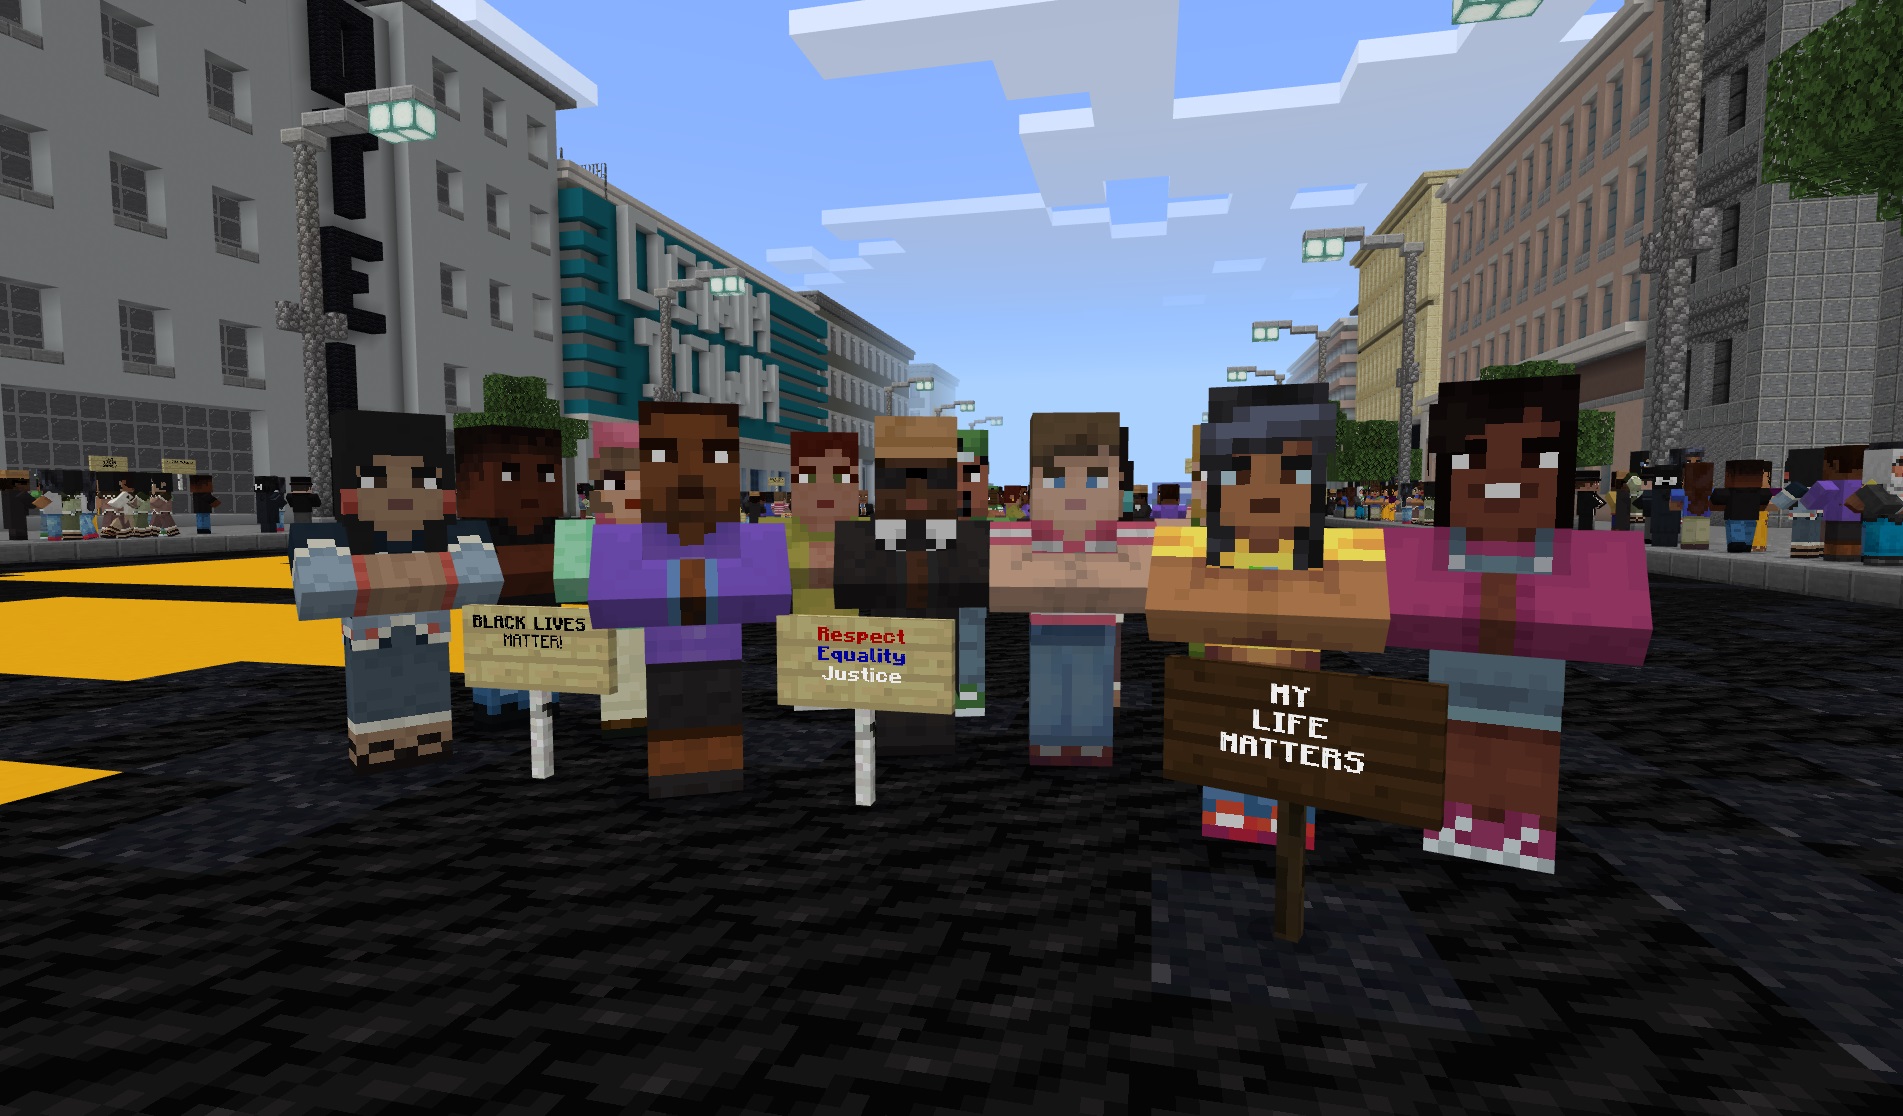 Screenshot from Minecraft Good Trouble lessons showing activists from the Black Lives Matter movement